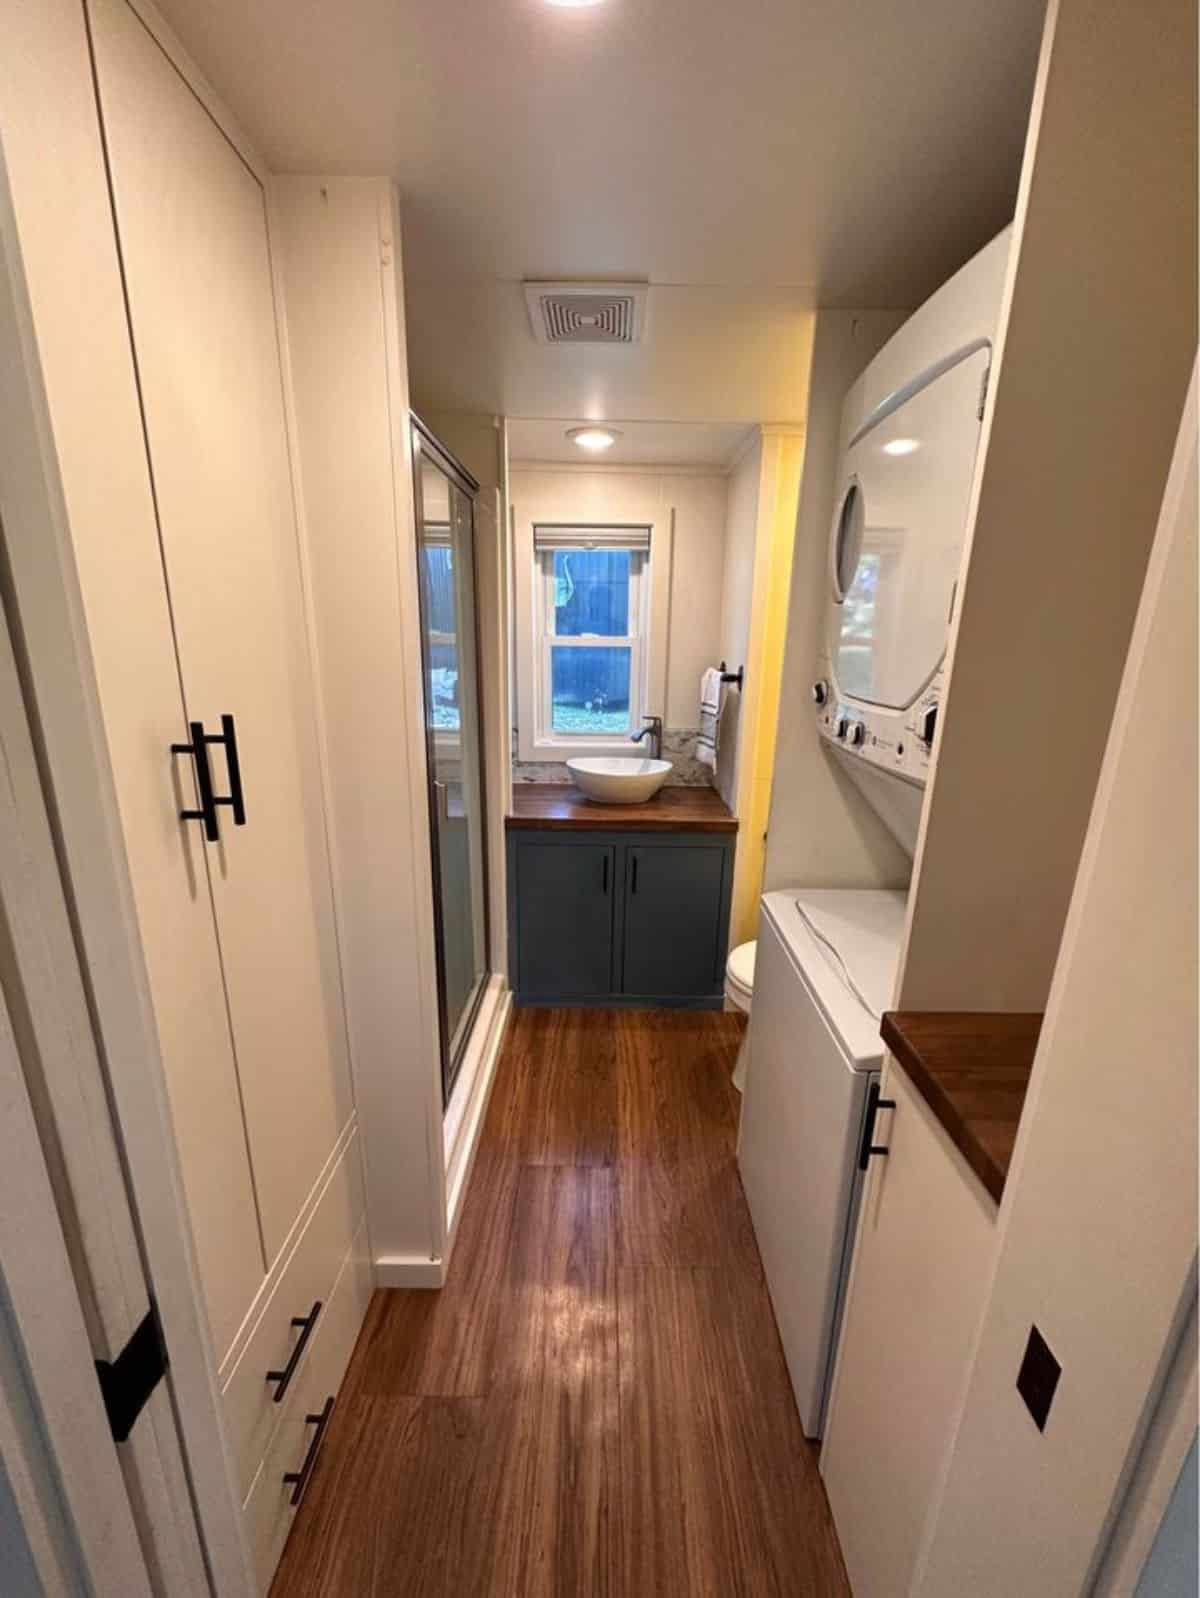 bathroom of 32' tiny home for four has all the standard fittings with washer dryer combo